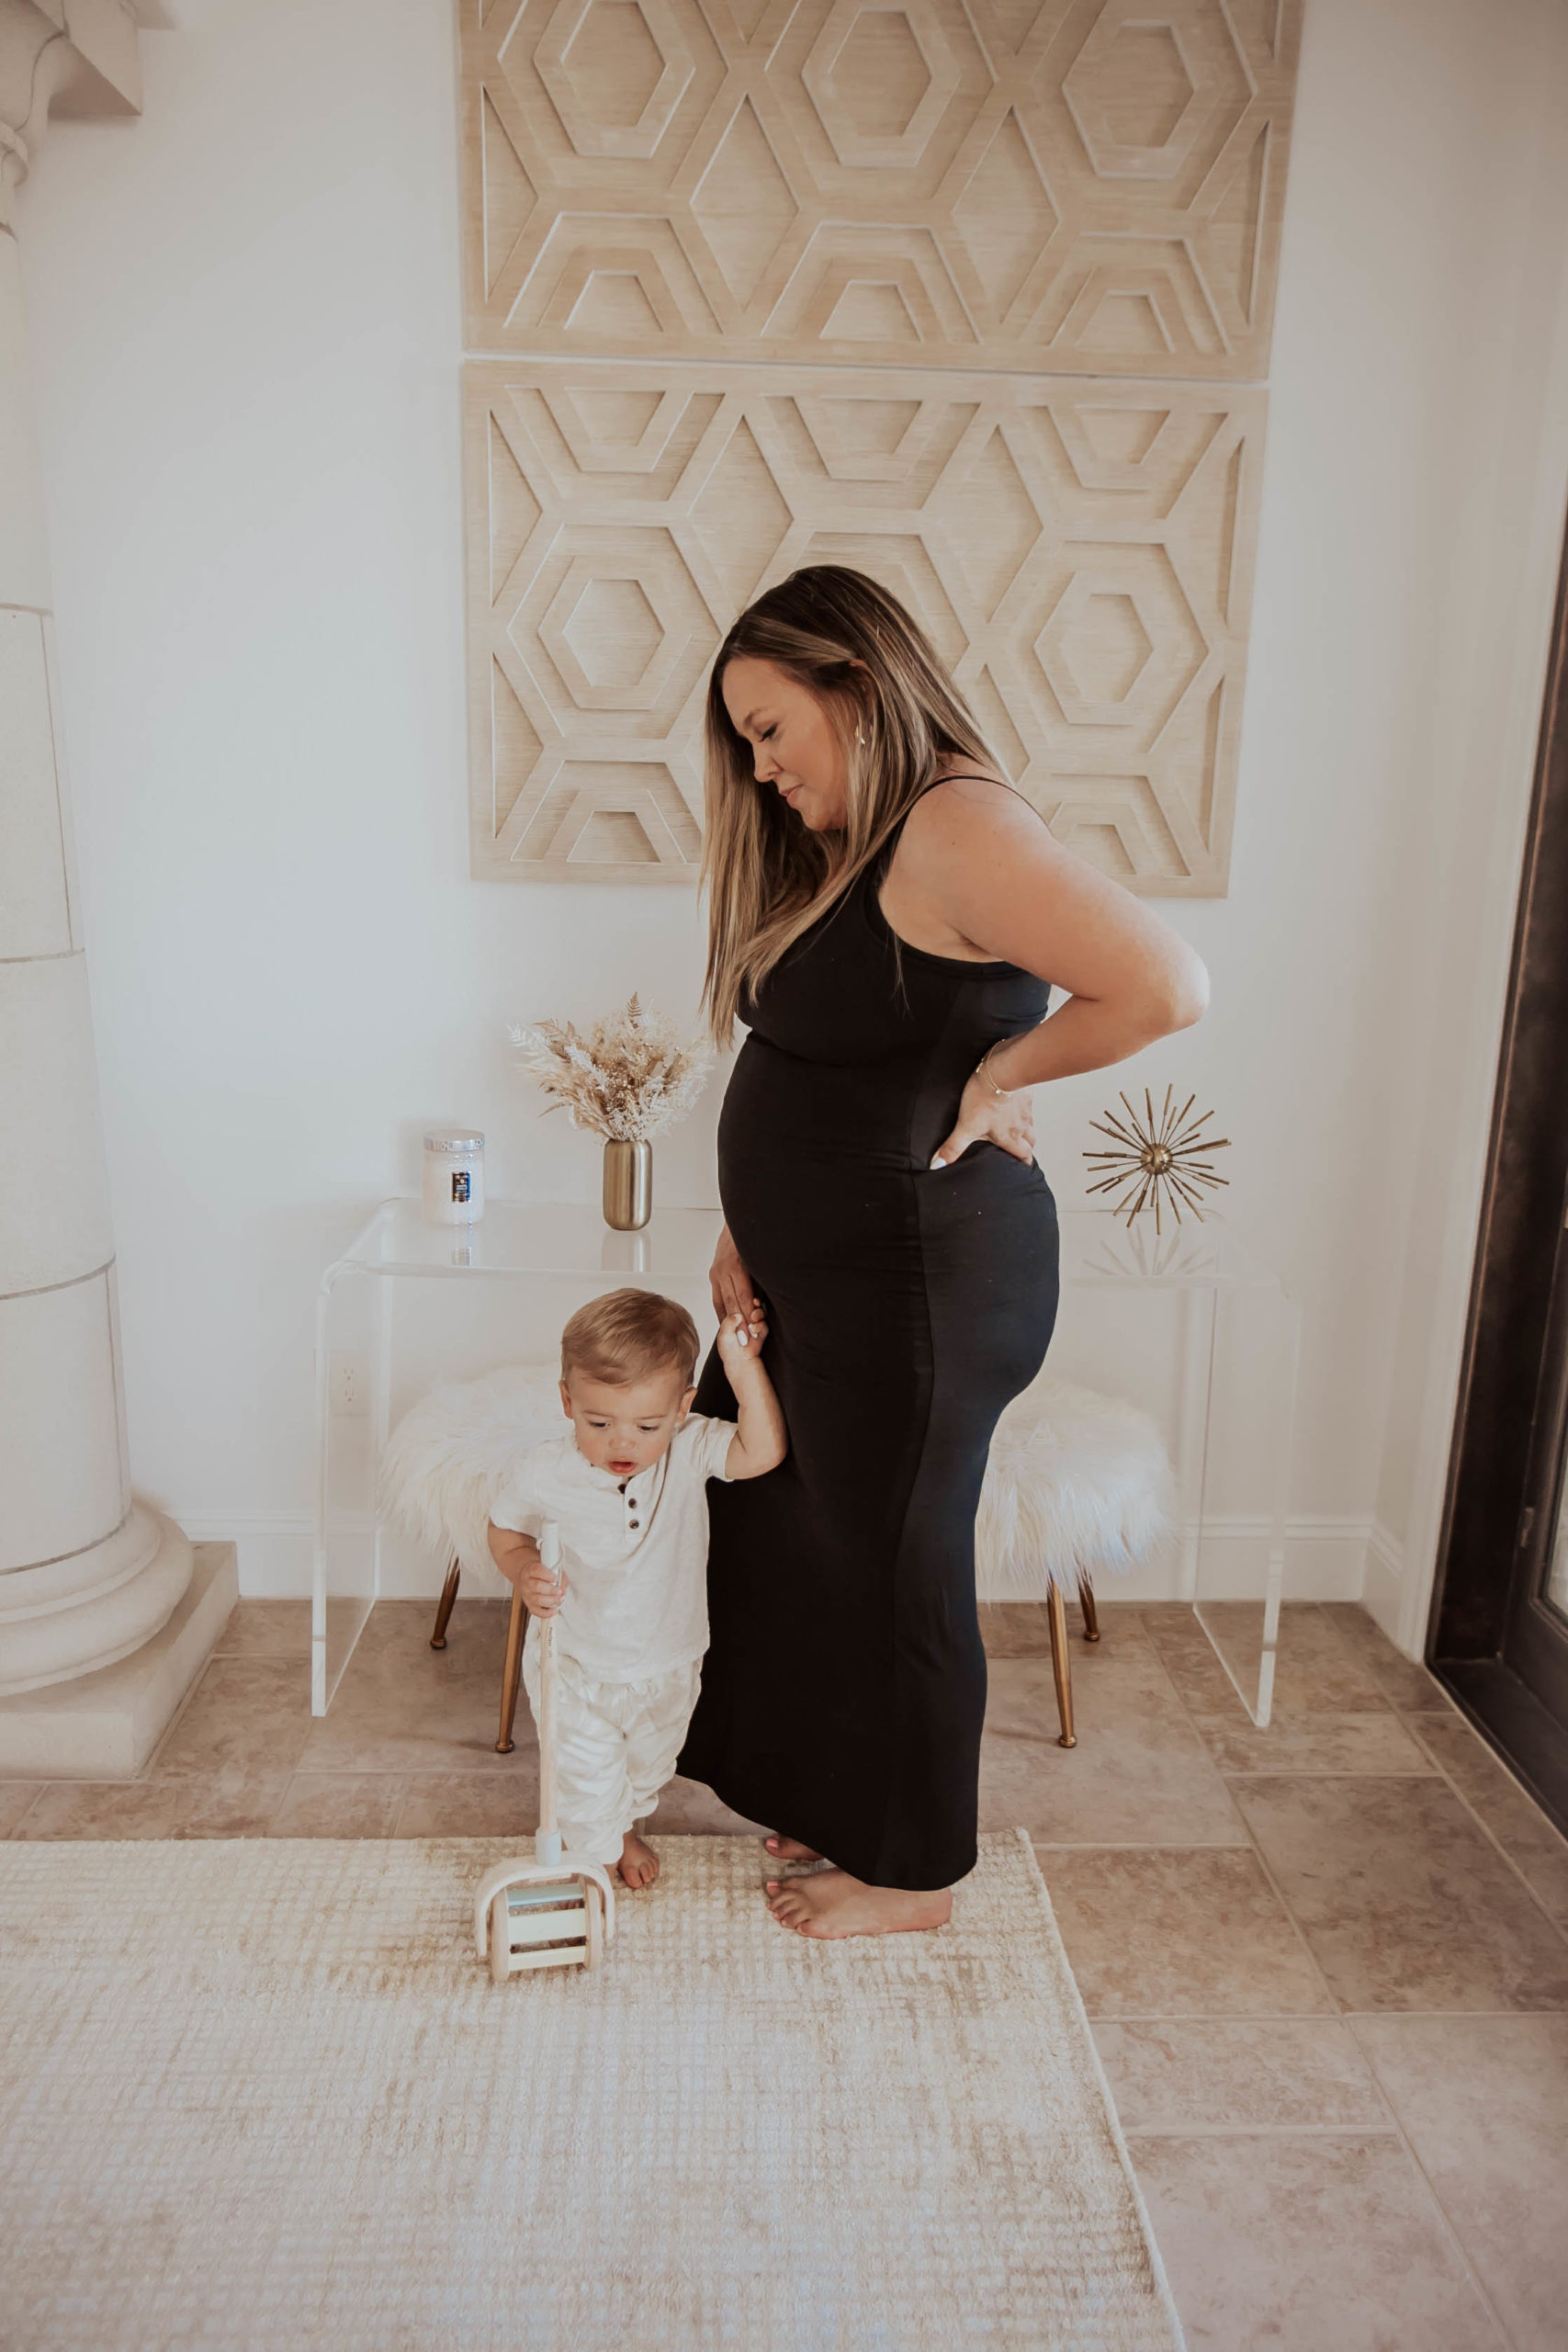 Reno blogger, Ashley Zeal Hurd, from The Ashley and Emily blog shares her 20 Week Pregnancy Update and gender reveal!